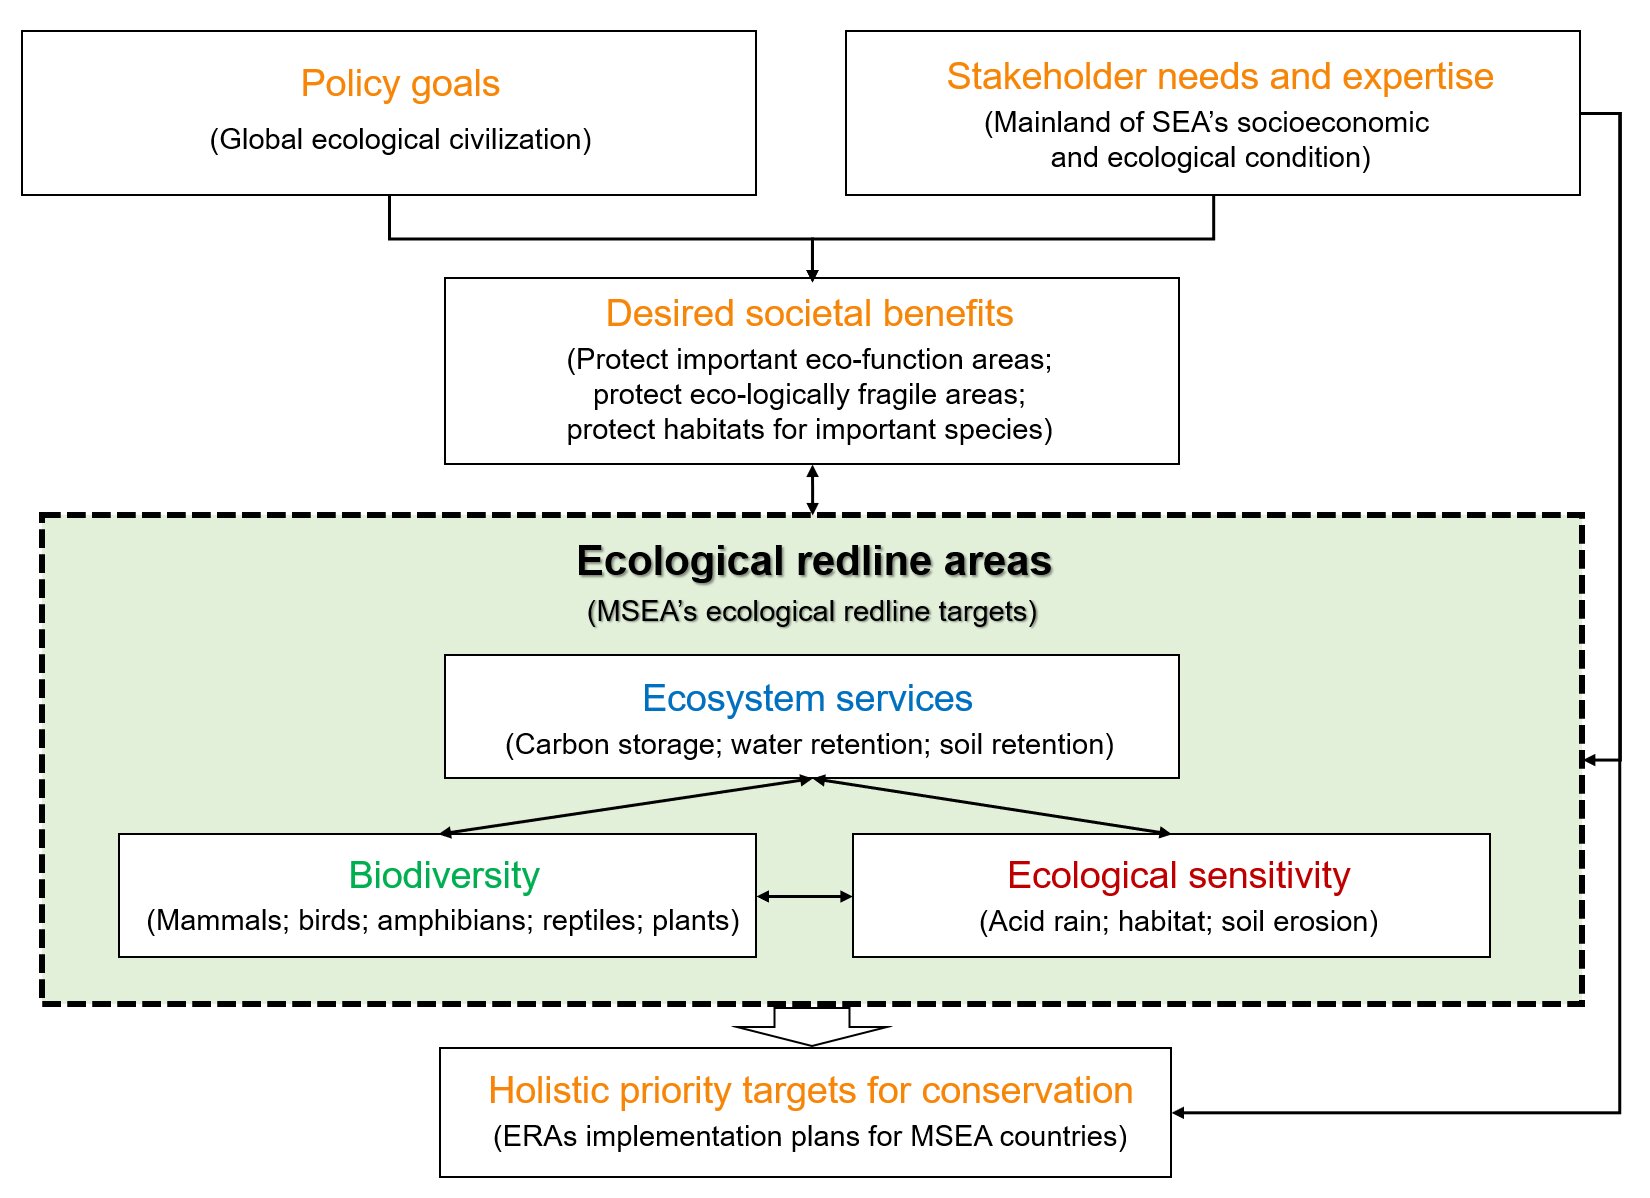 Ecological Redlines: Possible Model for Maintaining Biodiversity in Mainland Southeast Asia